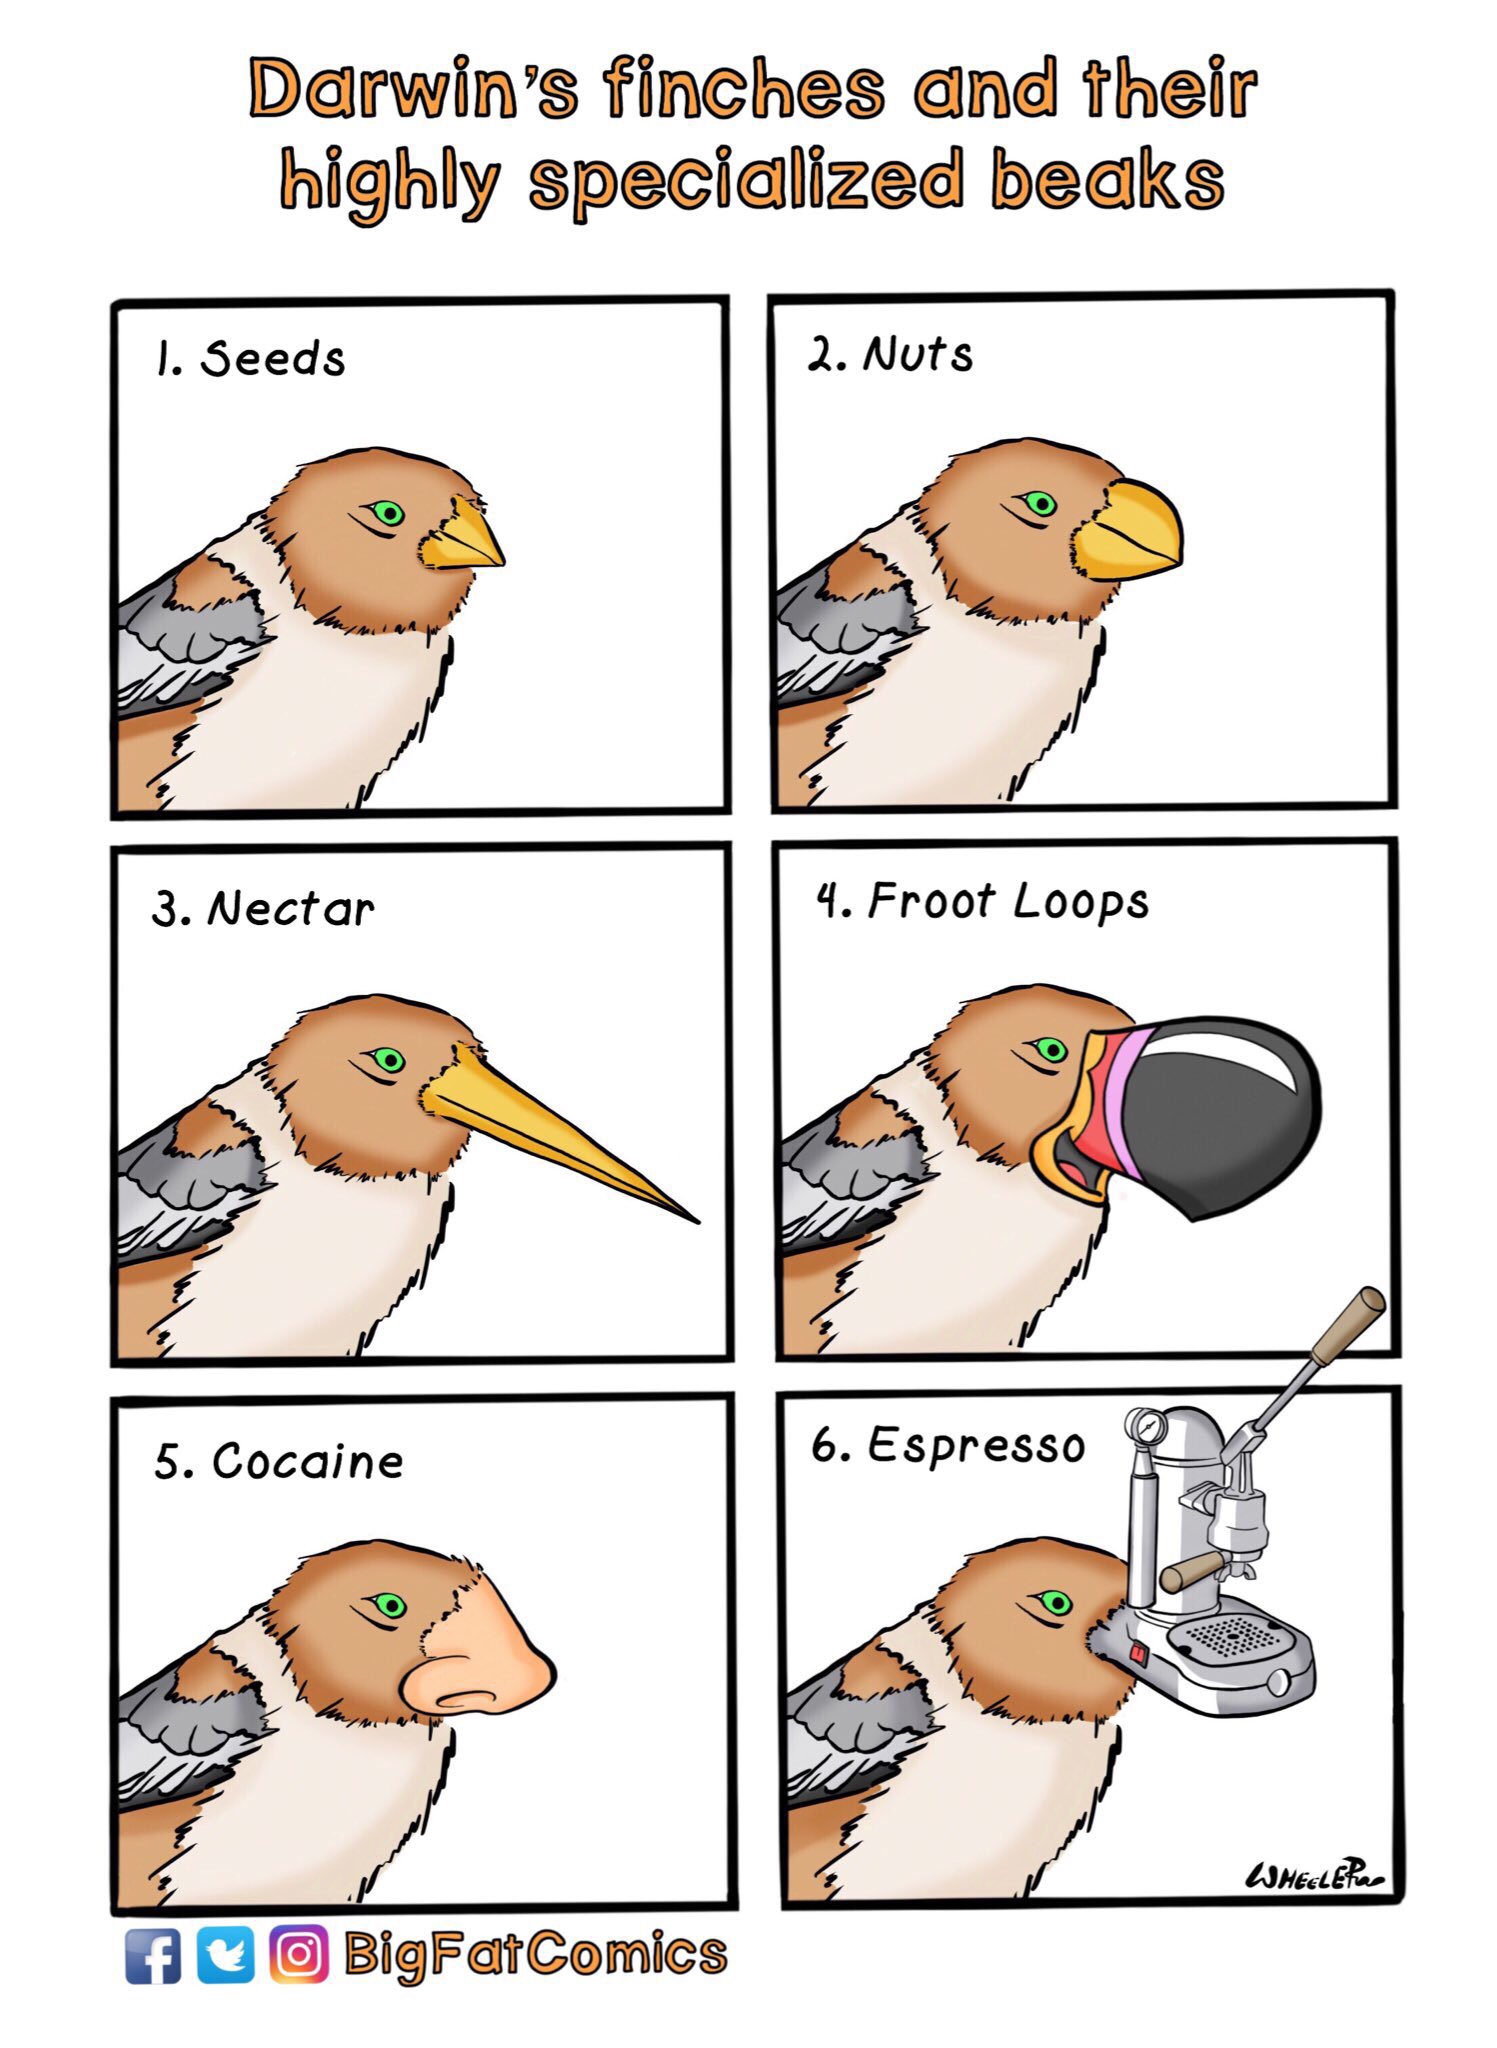 memes  - darwin's finches meme - Darwin's finches and their highly specialized beaks 1. Seeds 2. Nuts 3. Nectar 4. Froot Loops 5. Cocaine 6. Espresso Wheeler fe O BigFatComics